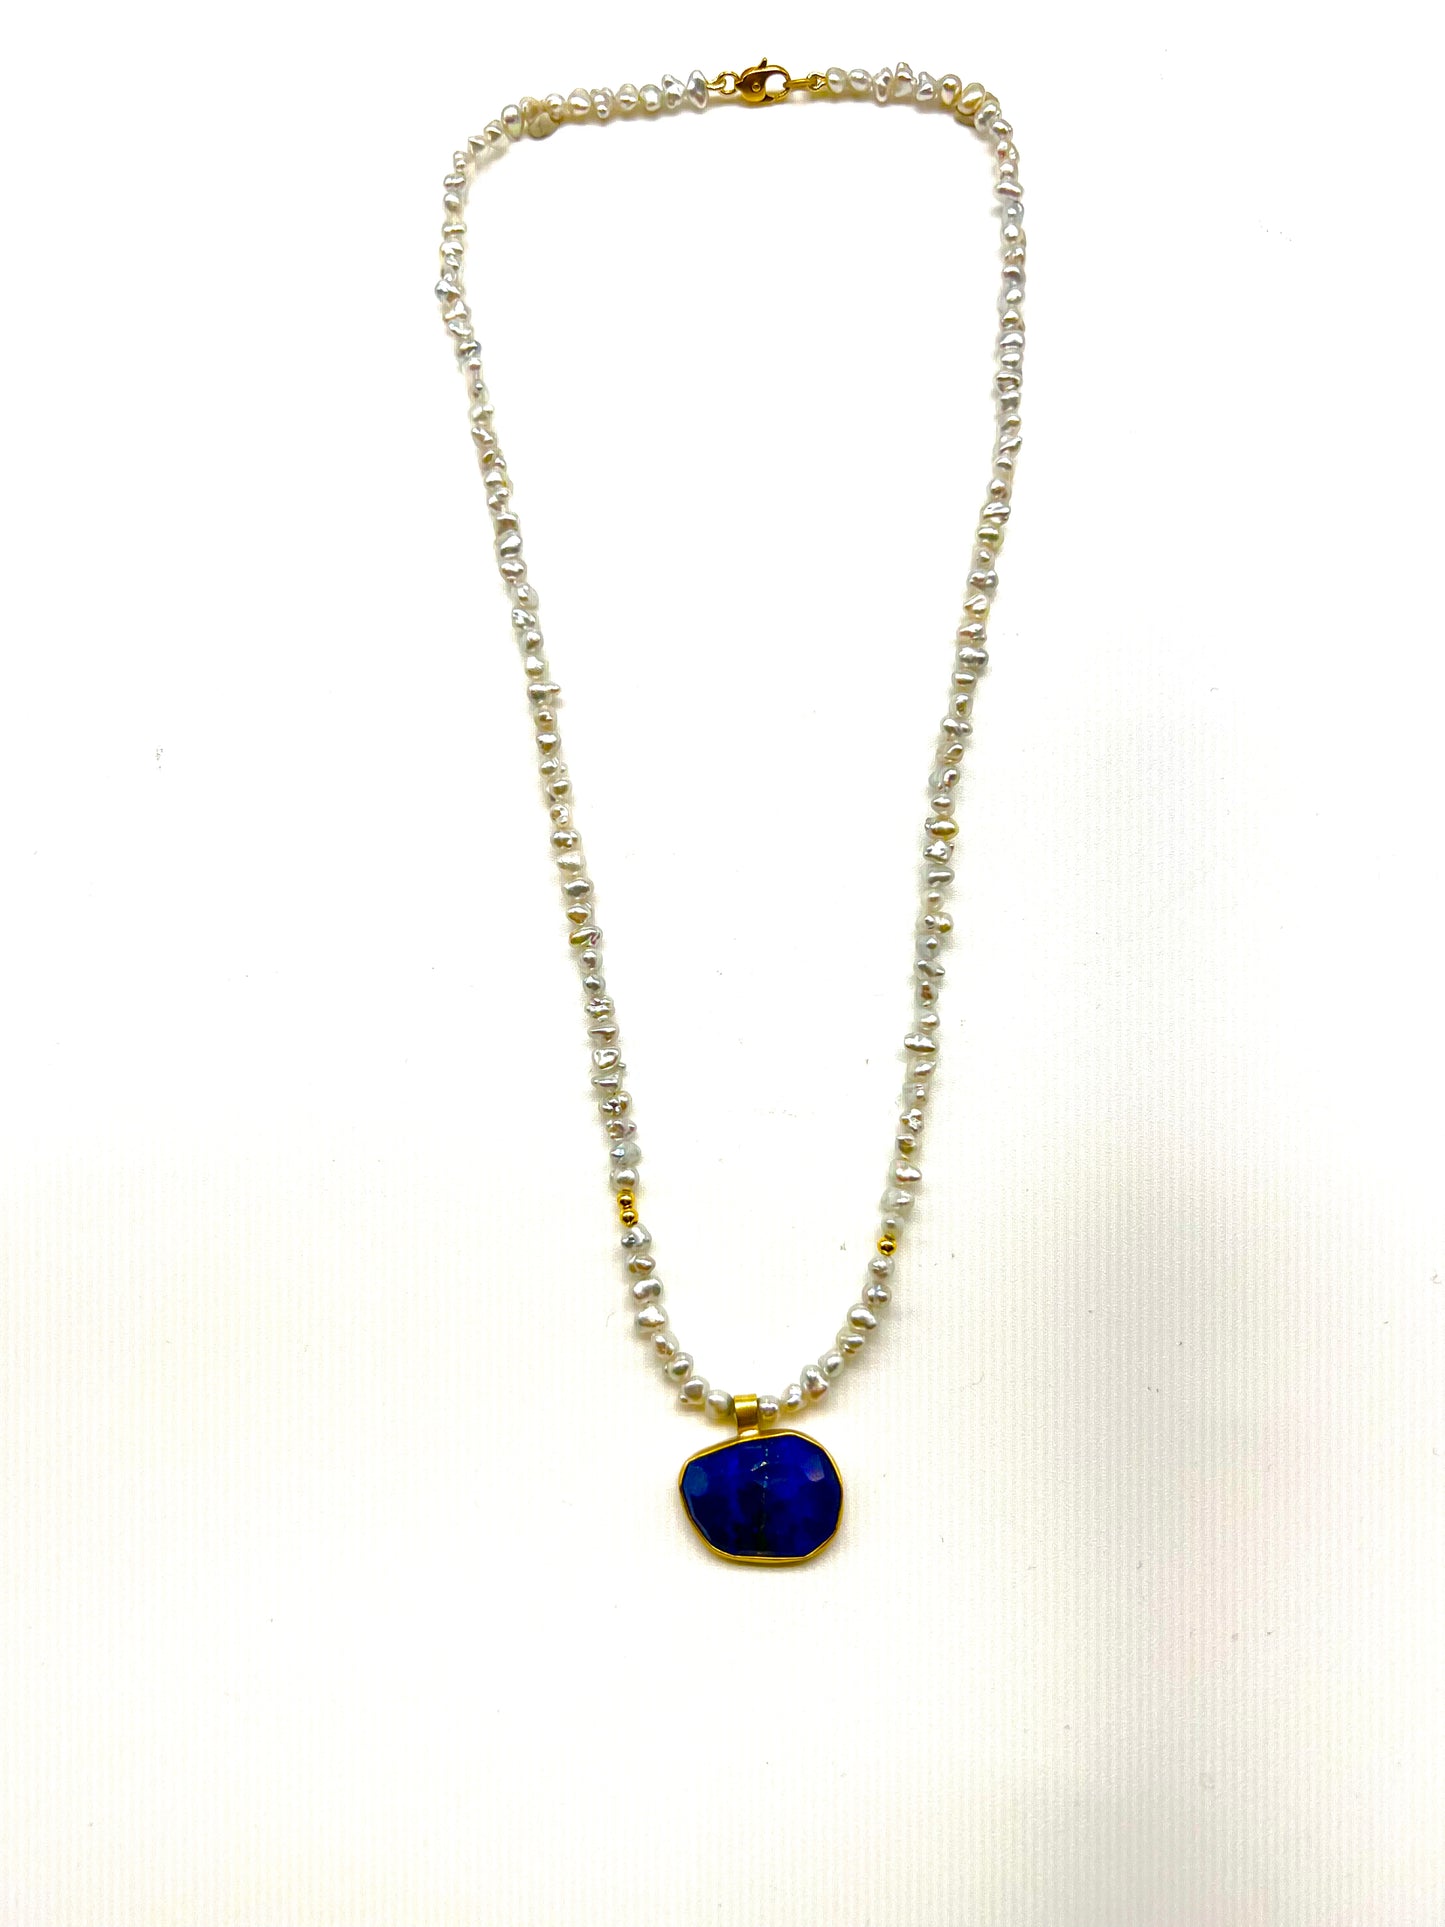 Keshi Pearl, Lapis, 22kt Gold Necklace